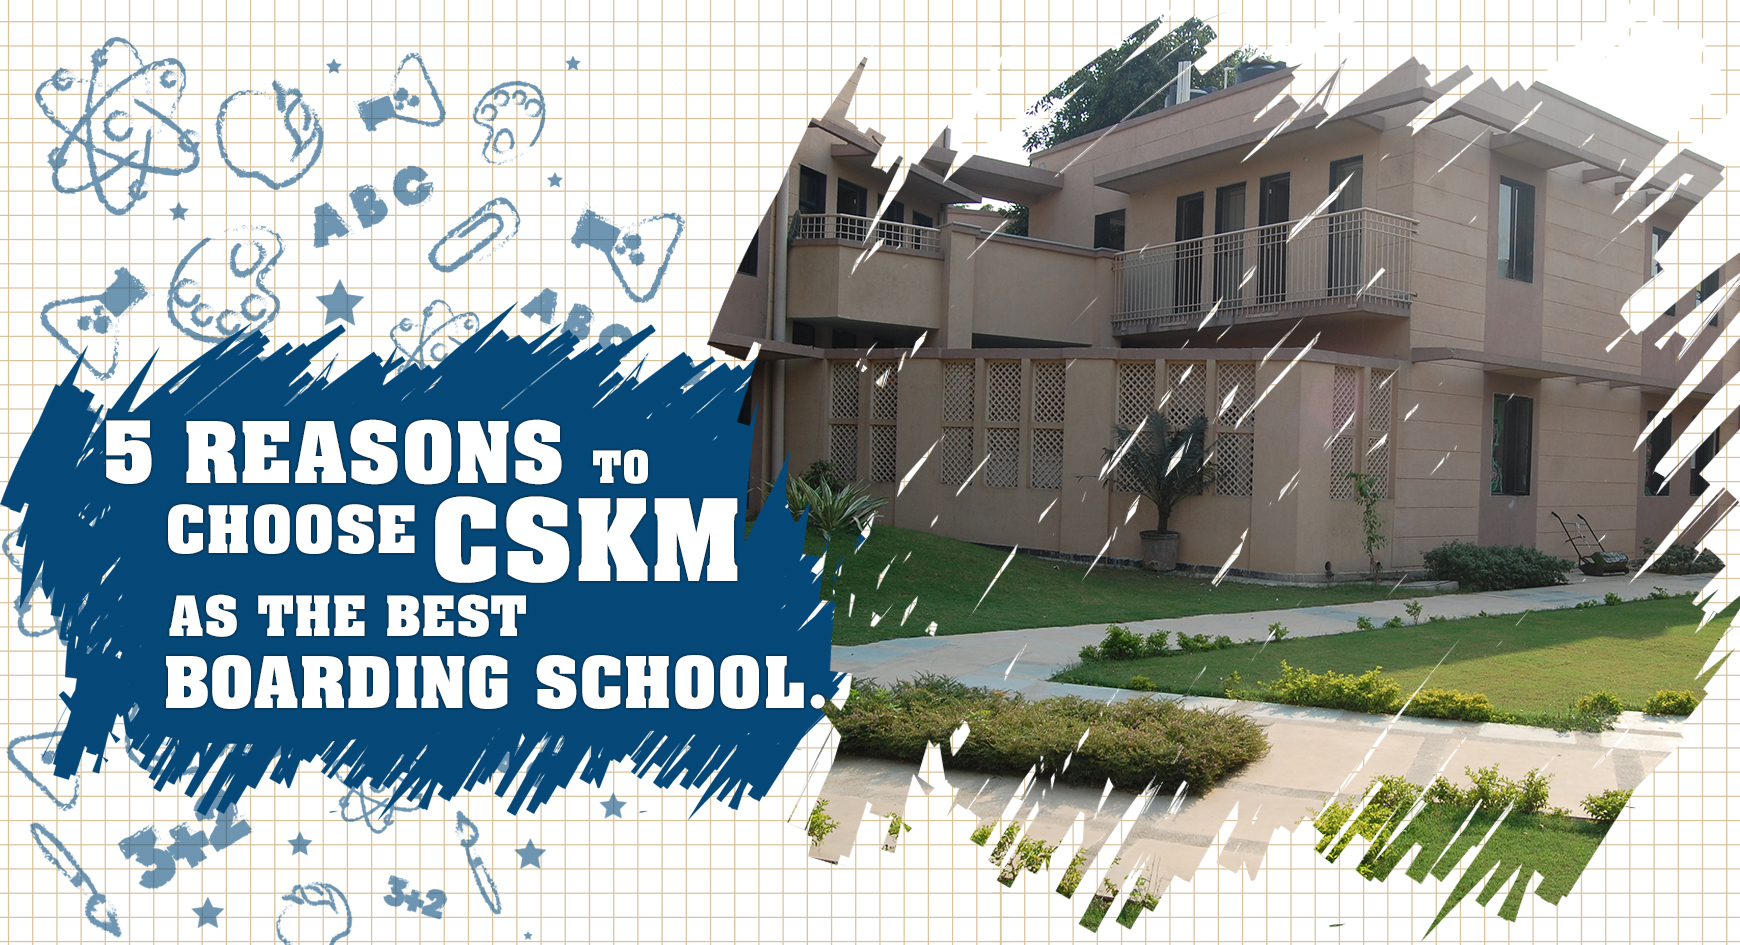 5 Reasons to Choose CSKM as the Best Boarding School